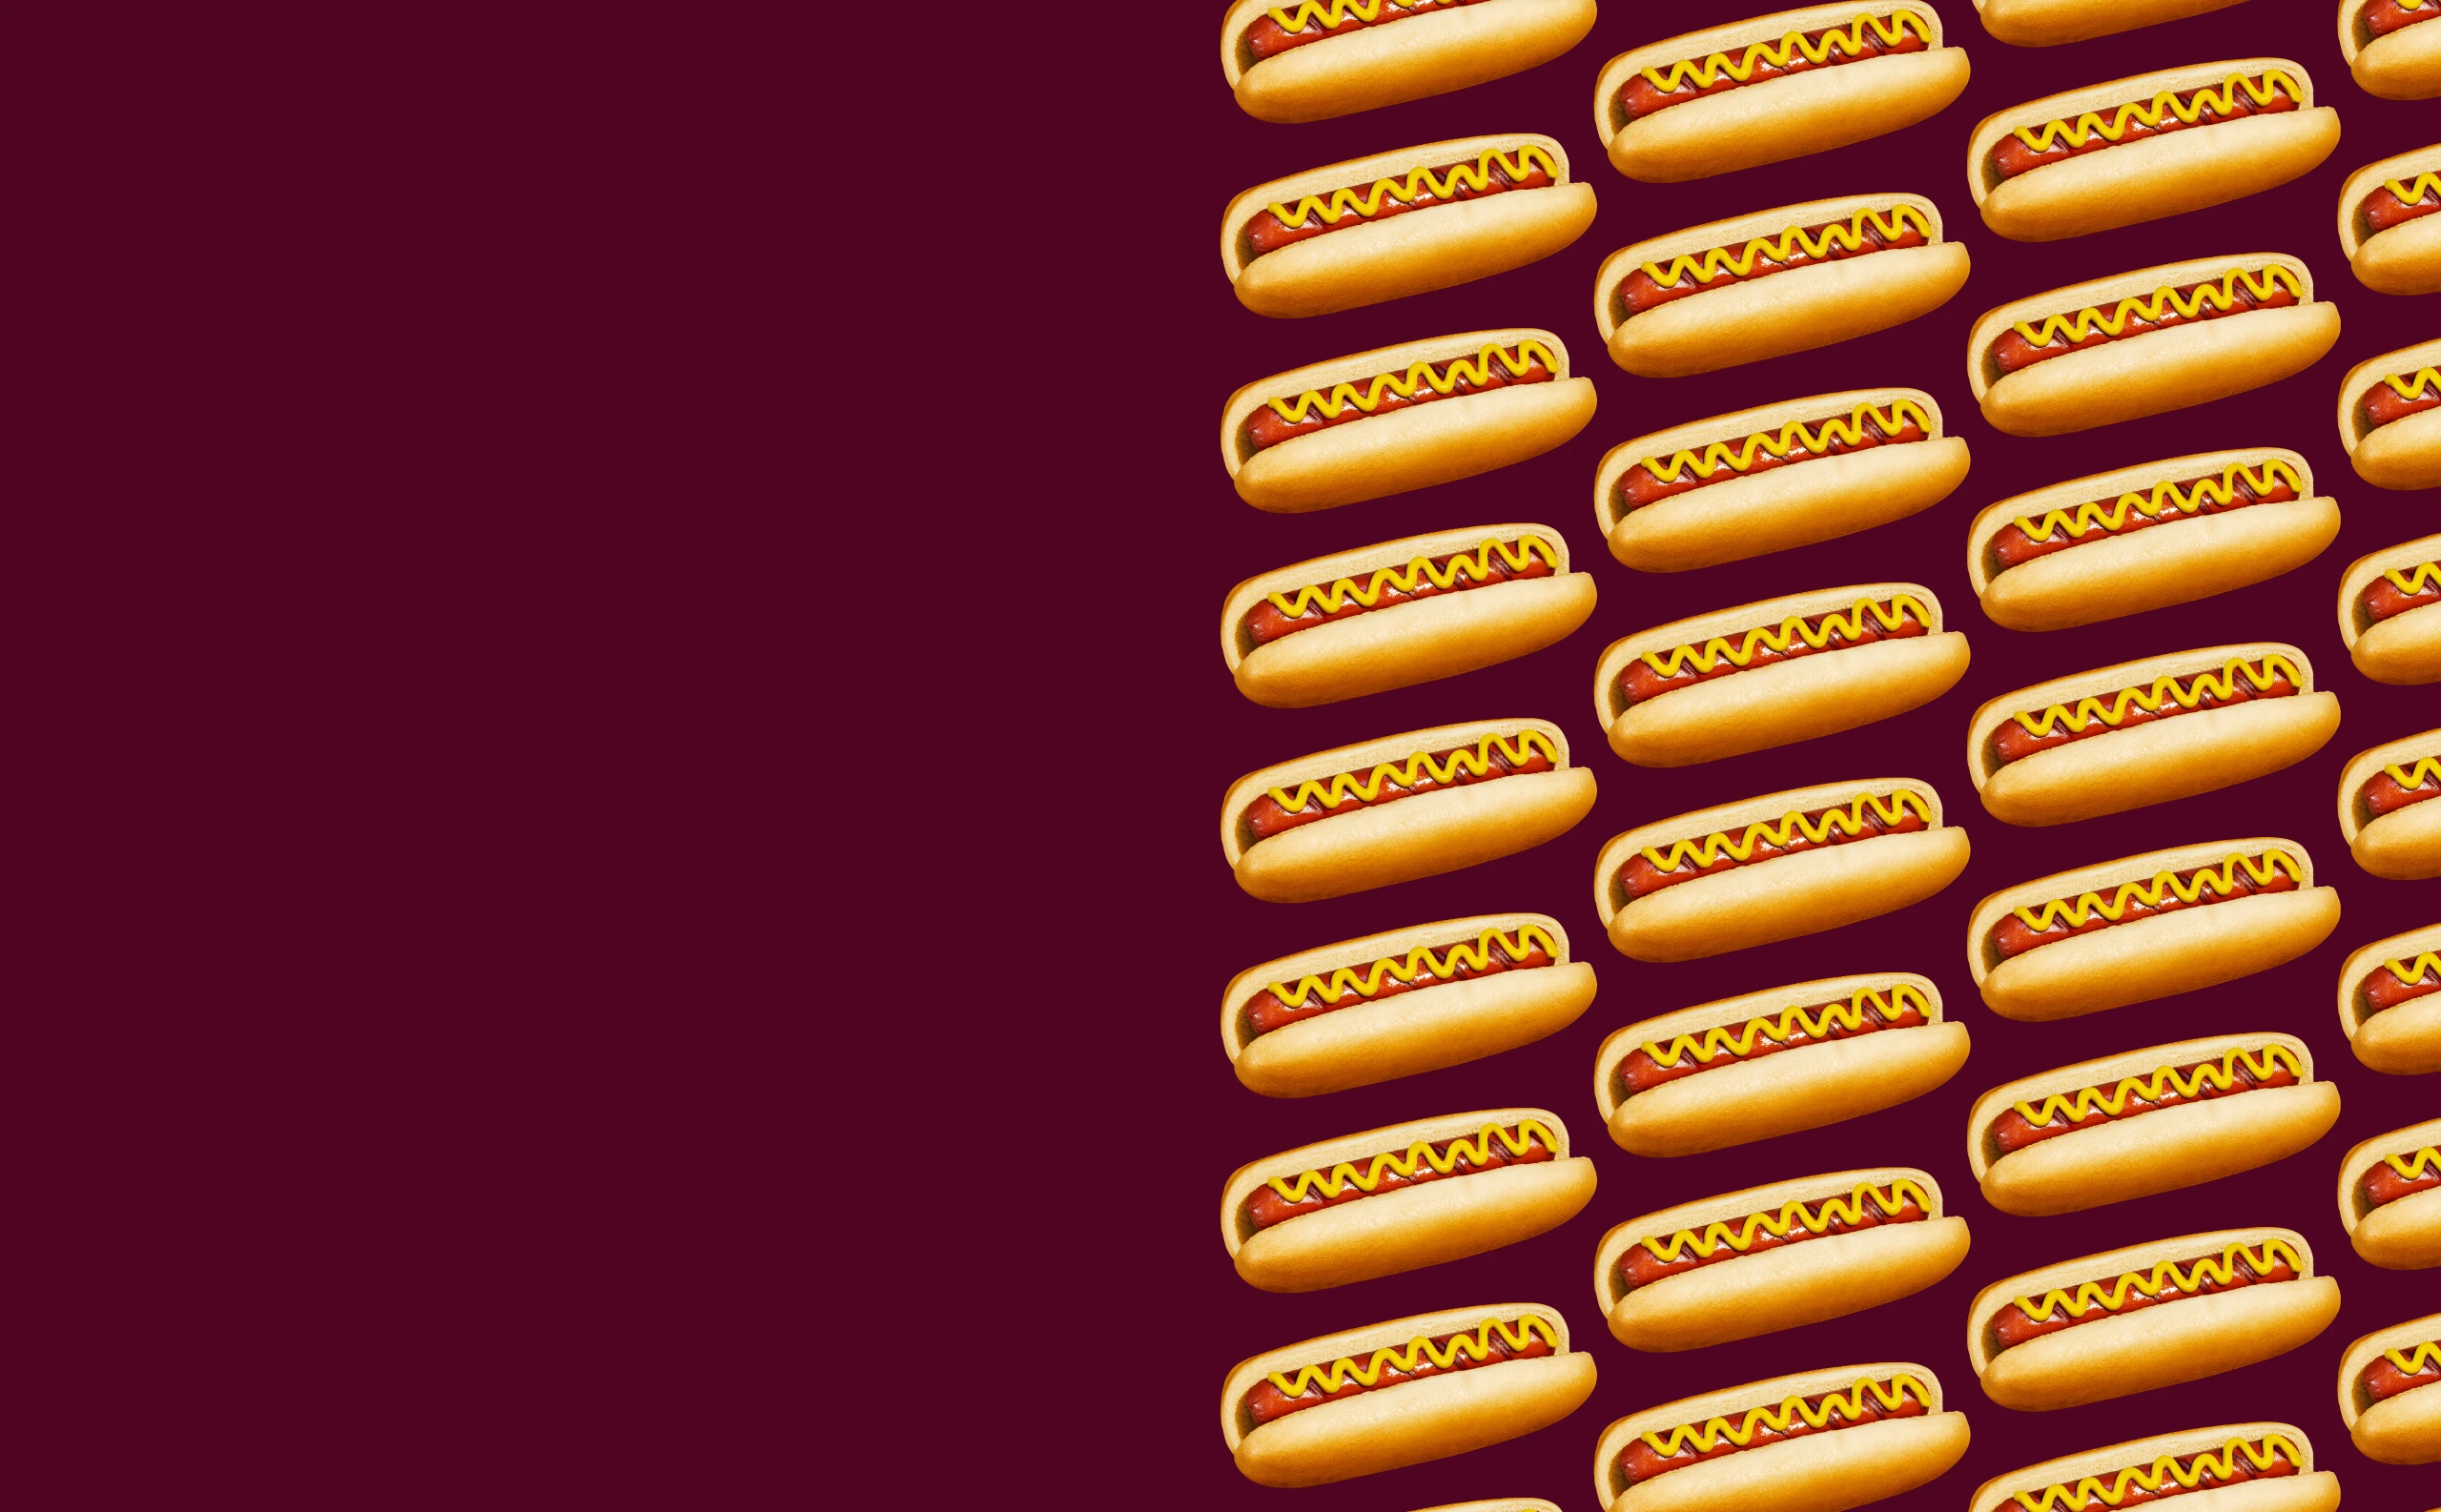 Impossible Foods Beef Hot Dogs Made from Plants in a grid pattern on a dark background